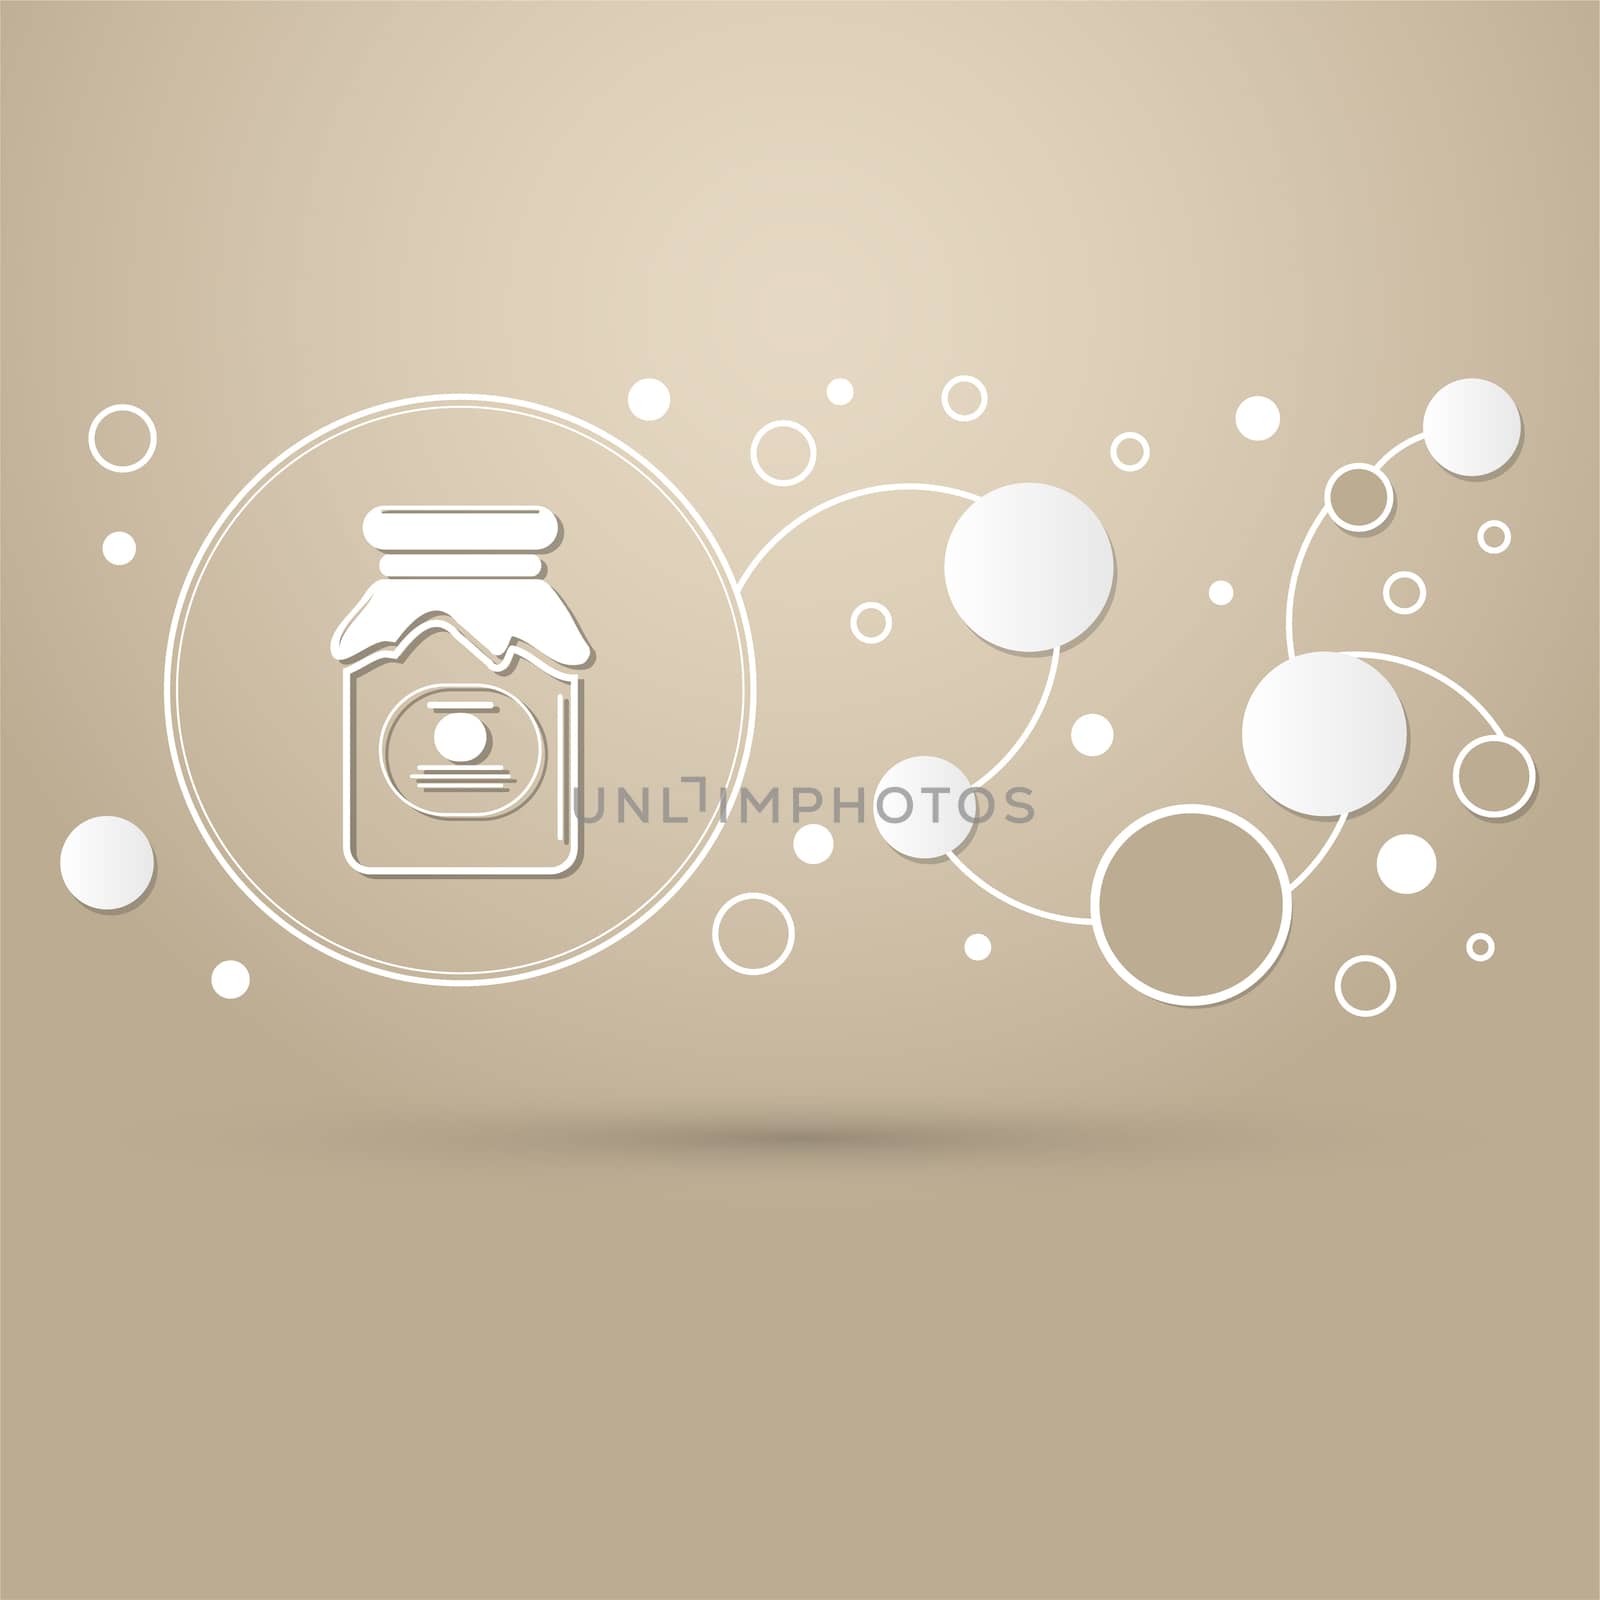 Jam Icon on a brown background with elegant style and modern design infographic. illustration